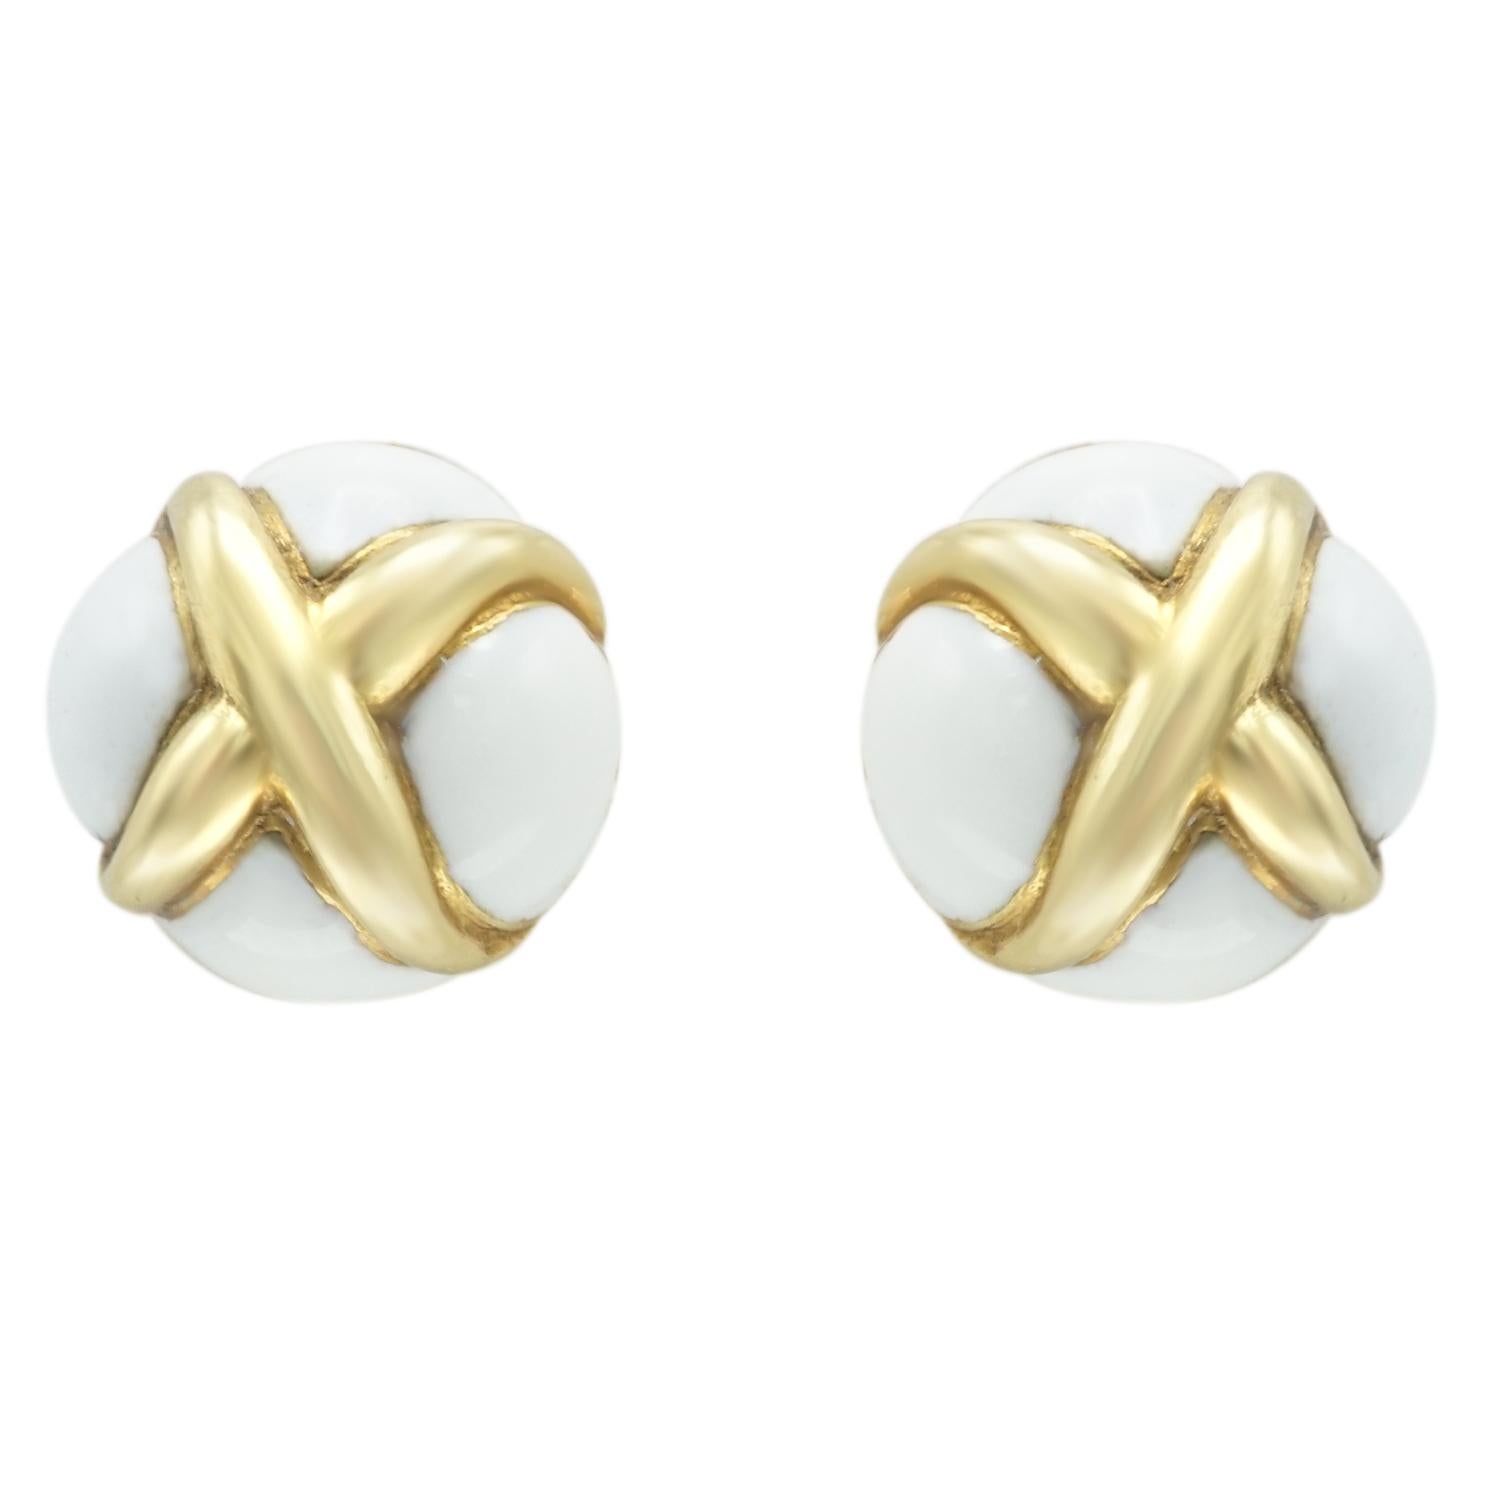 Tiffany & Co. Schlumberger 18 Karat Gold and Enamel Cufflinks In Excellent Condition For Sale In New York, NY